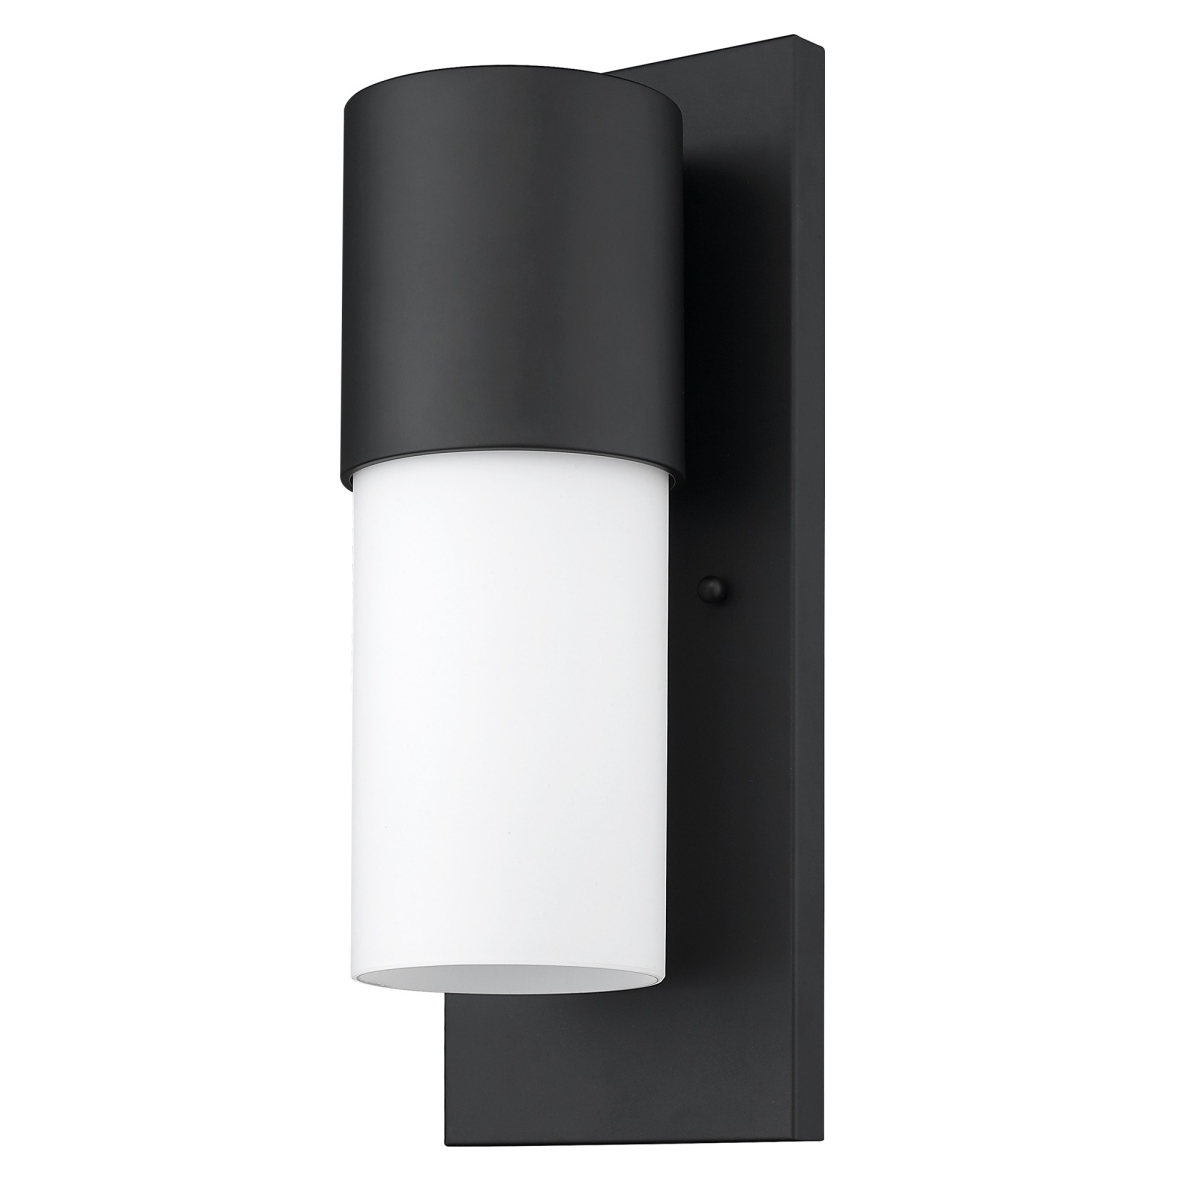 Picture of HomeRoots 398467 16 x 6.25 x 8.5 in. Cooper 1-Light Matte Black Wall Light